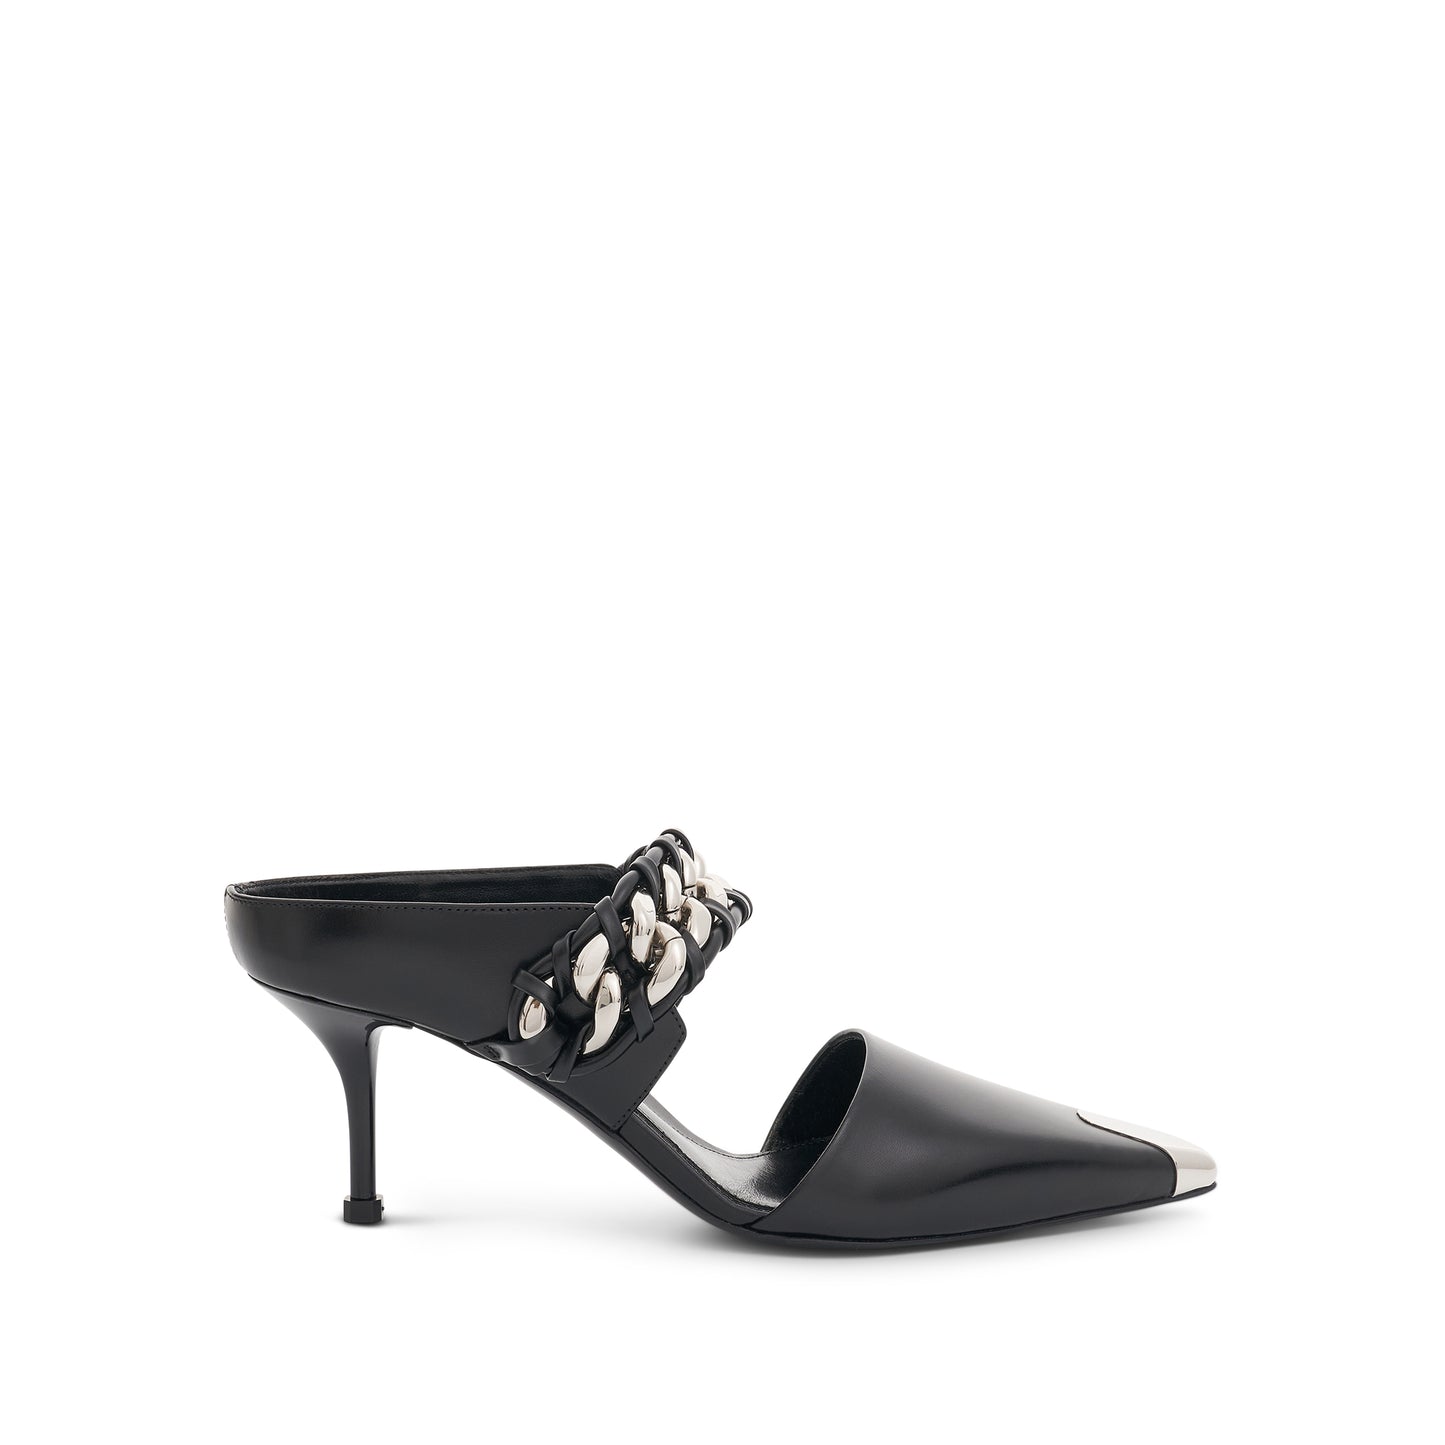 Chain Link Leather Pumps in Black/Silver